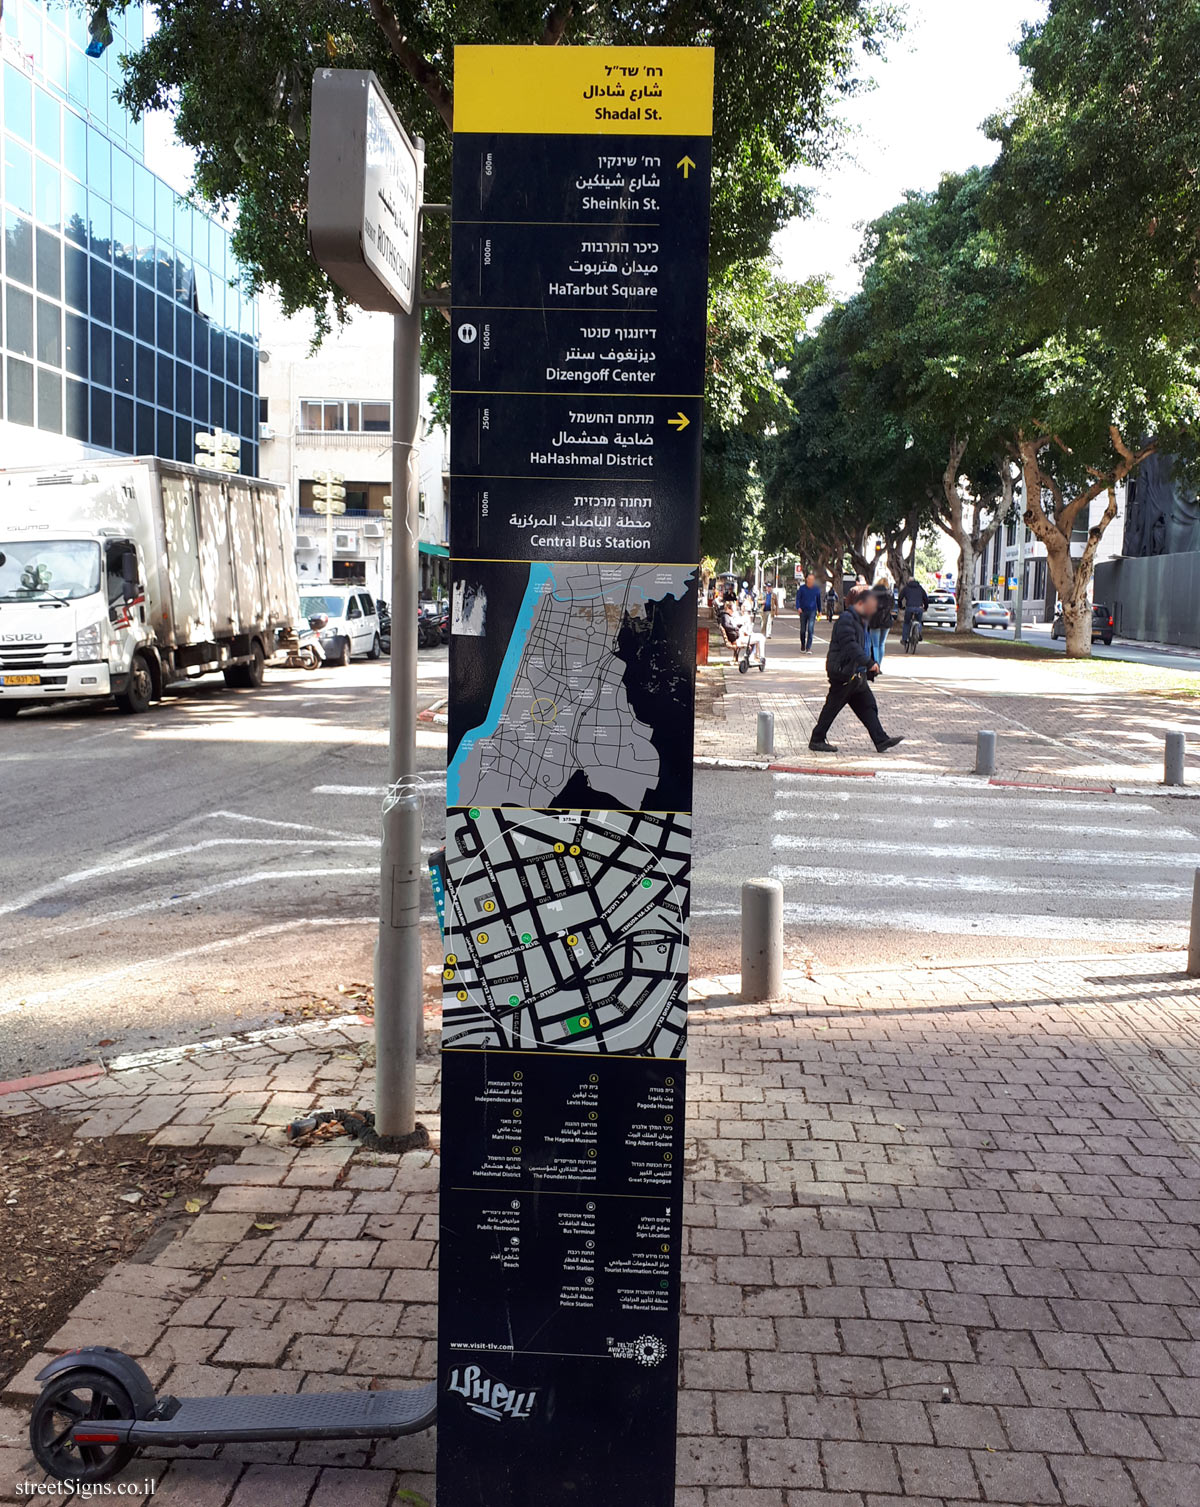 Tel Aviv - Shadal St (About Rothschild Boulevard)  (the other side of the sign)